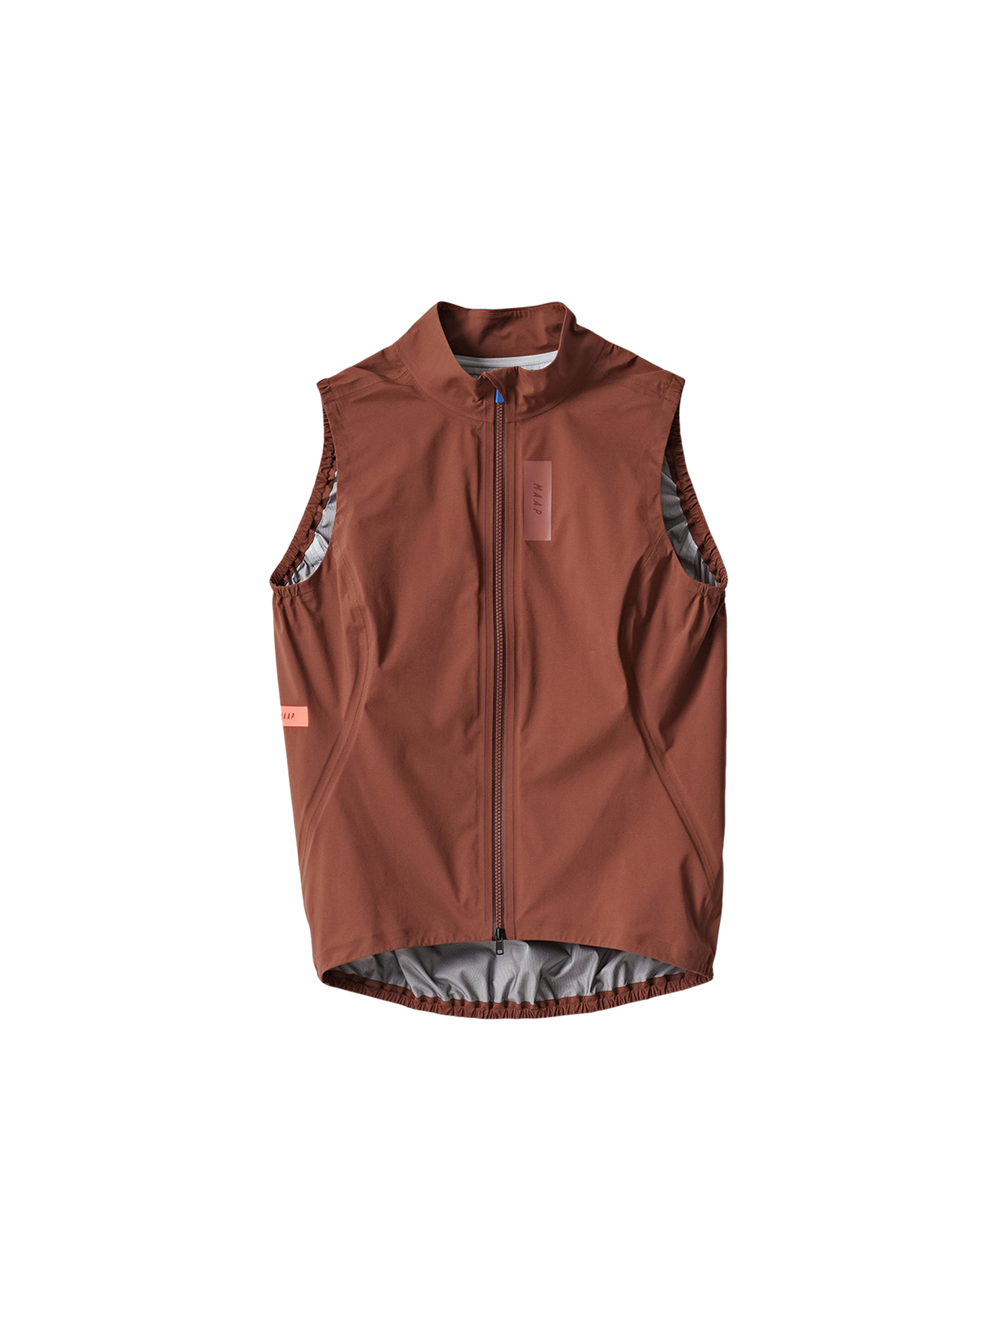 Product Image for Women's Atmos Vest